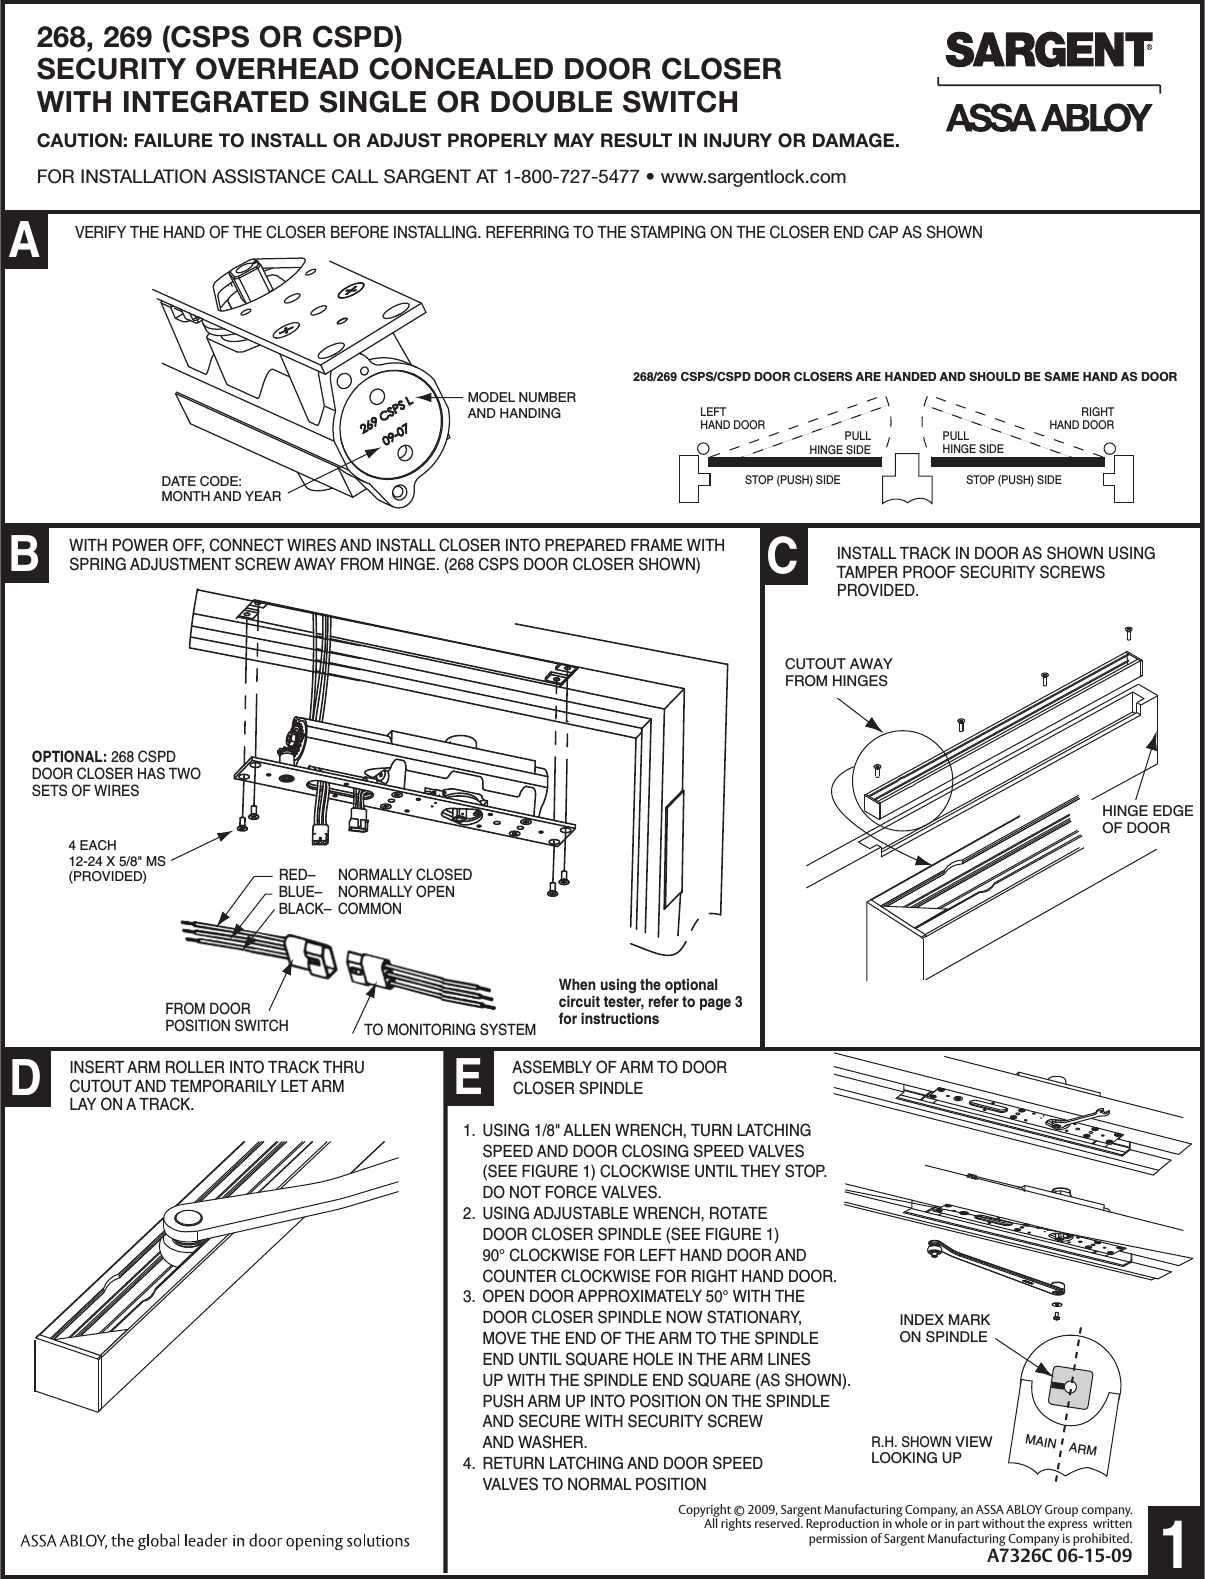 Page 1 of 3 - Sargent  Installation Instructions For 268/269 Series Concealed Door Closers (with 'CSPS/CSPD' Position A7326C